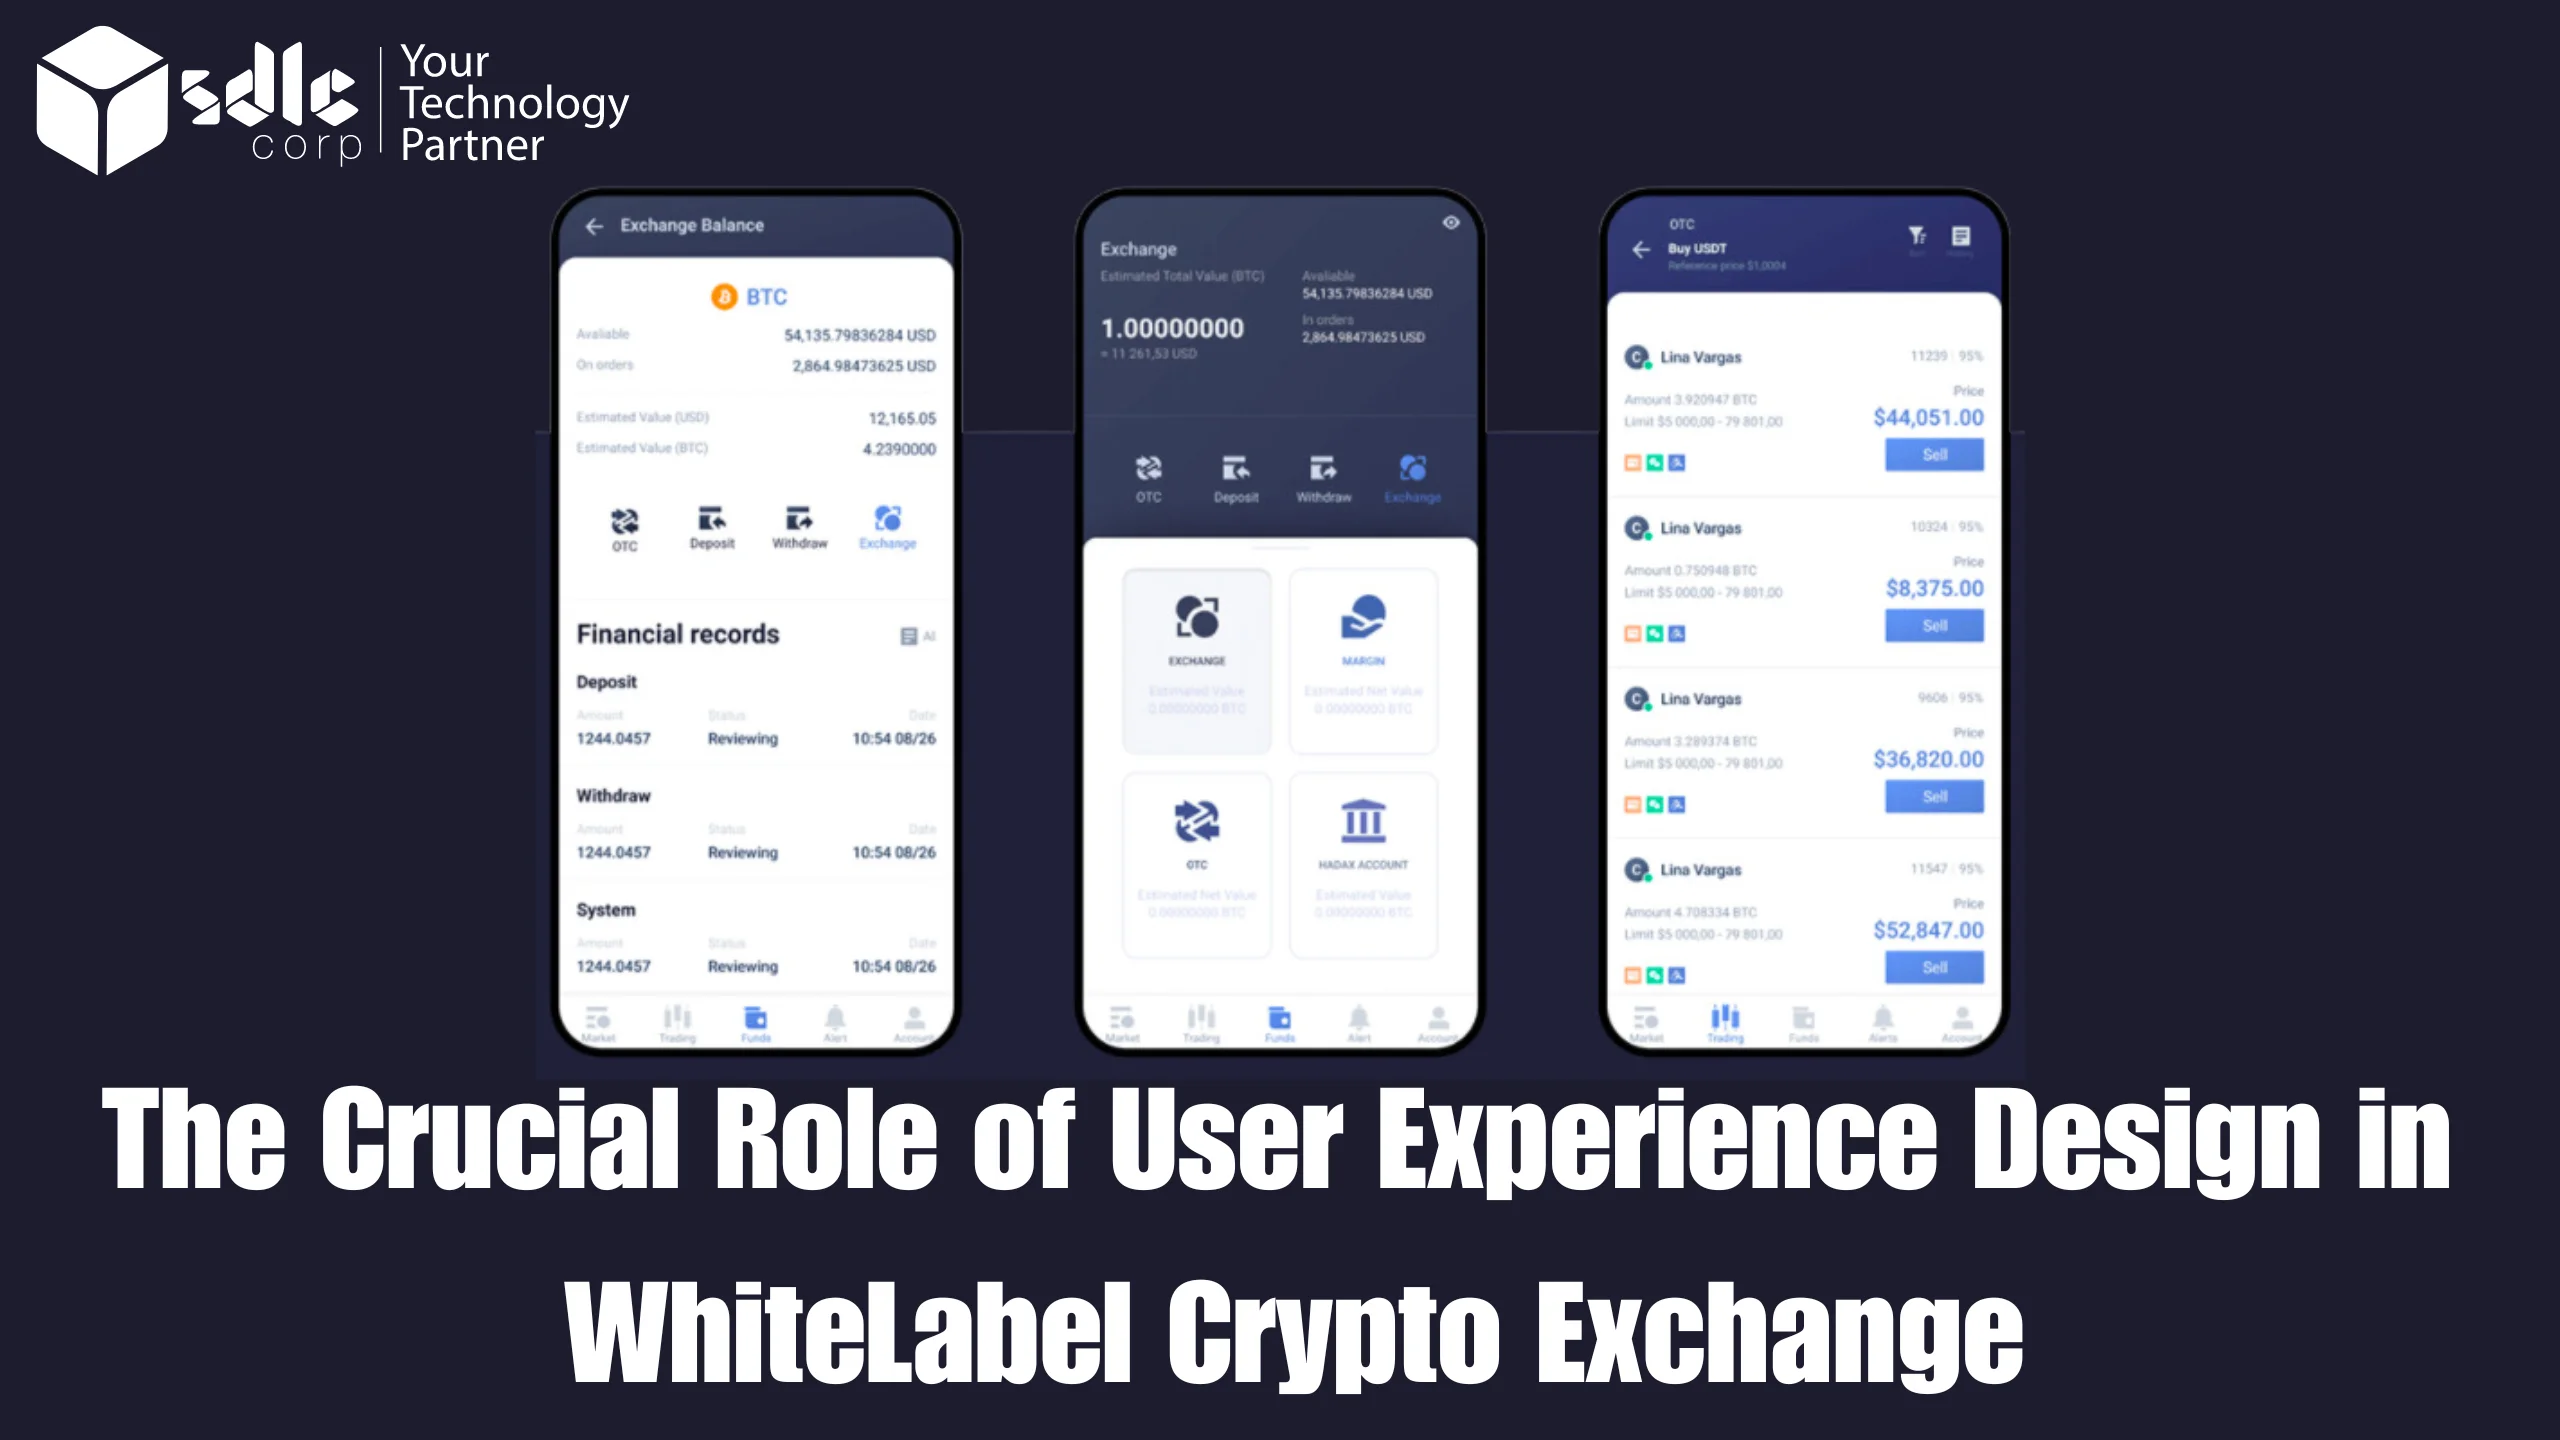 The Crucial Role of User Experience Design in WhiteLabel Crypto Exchange